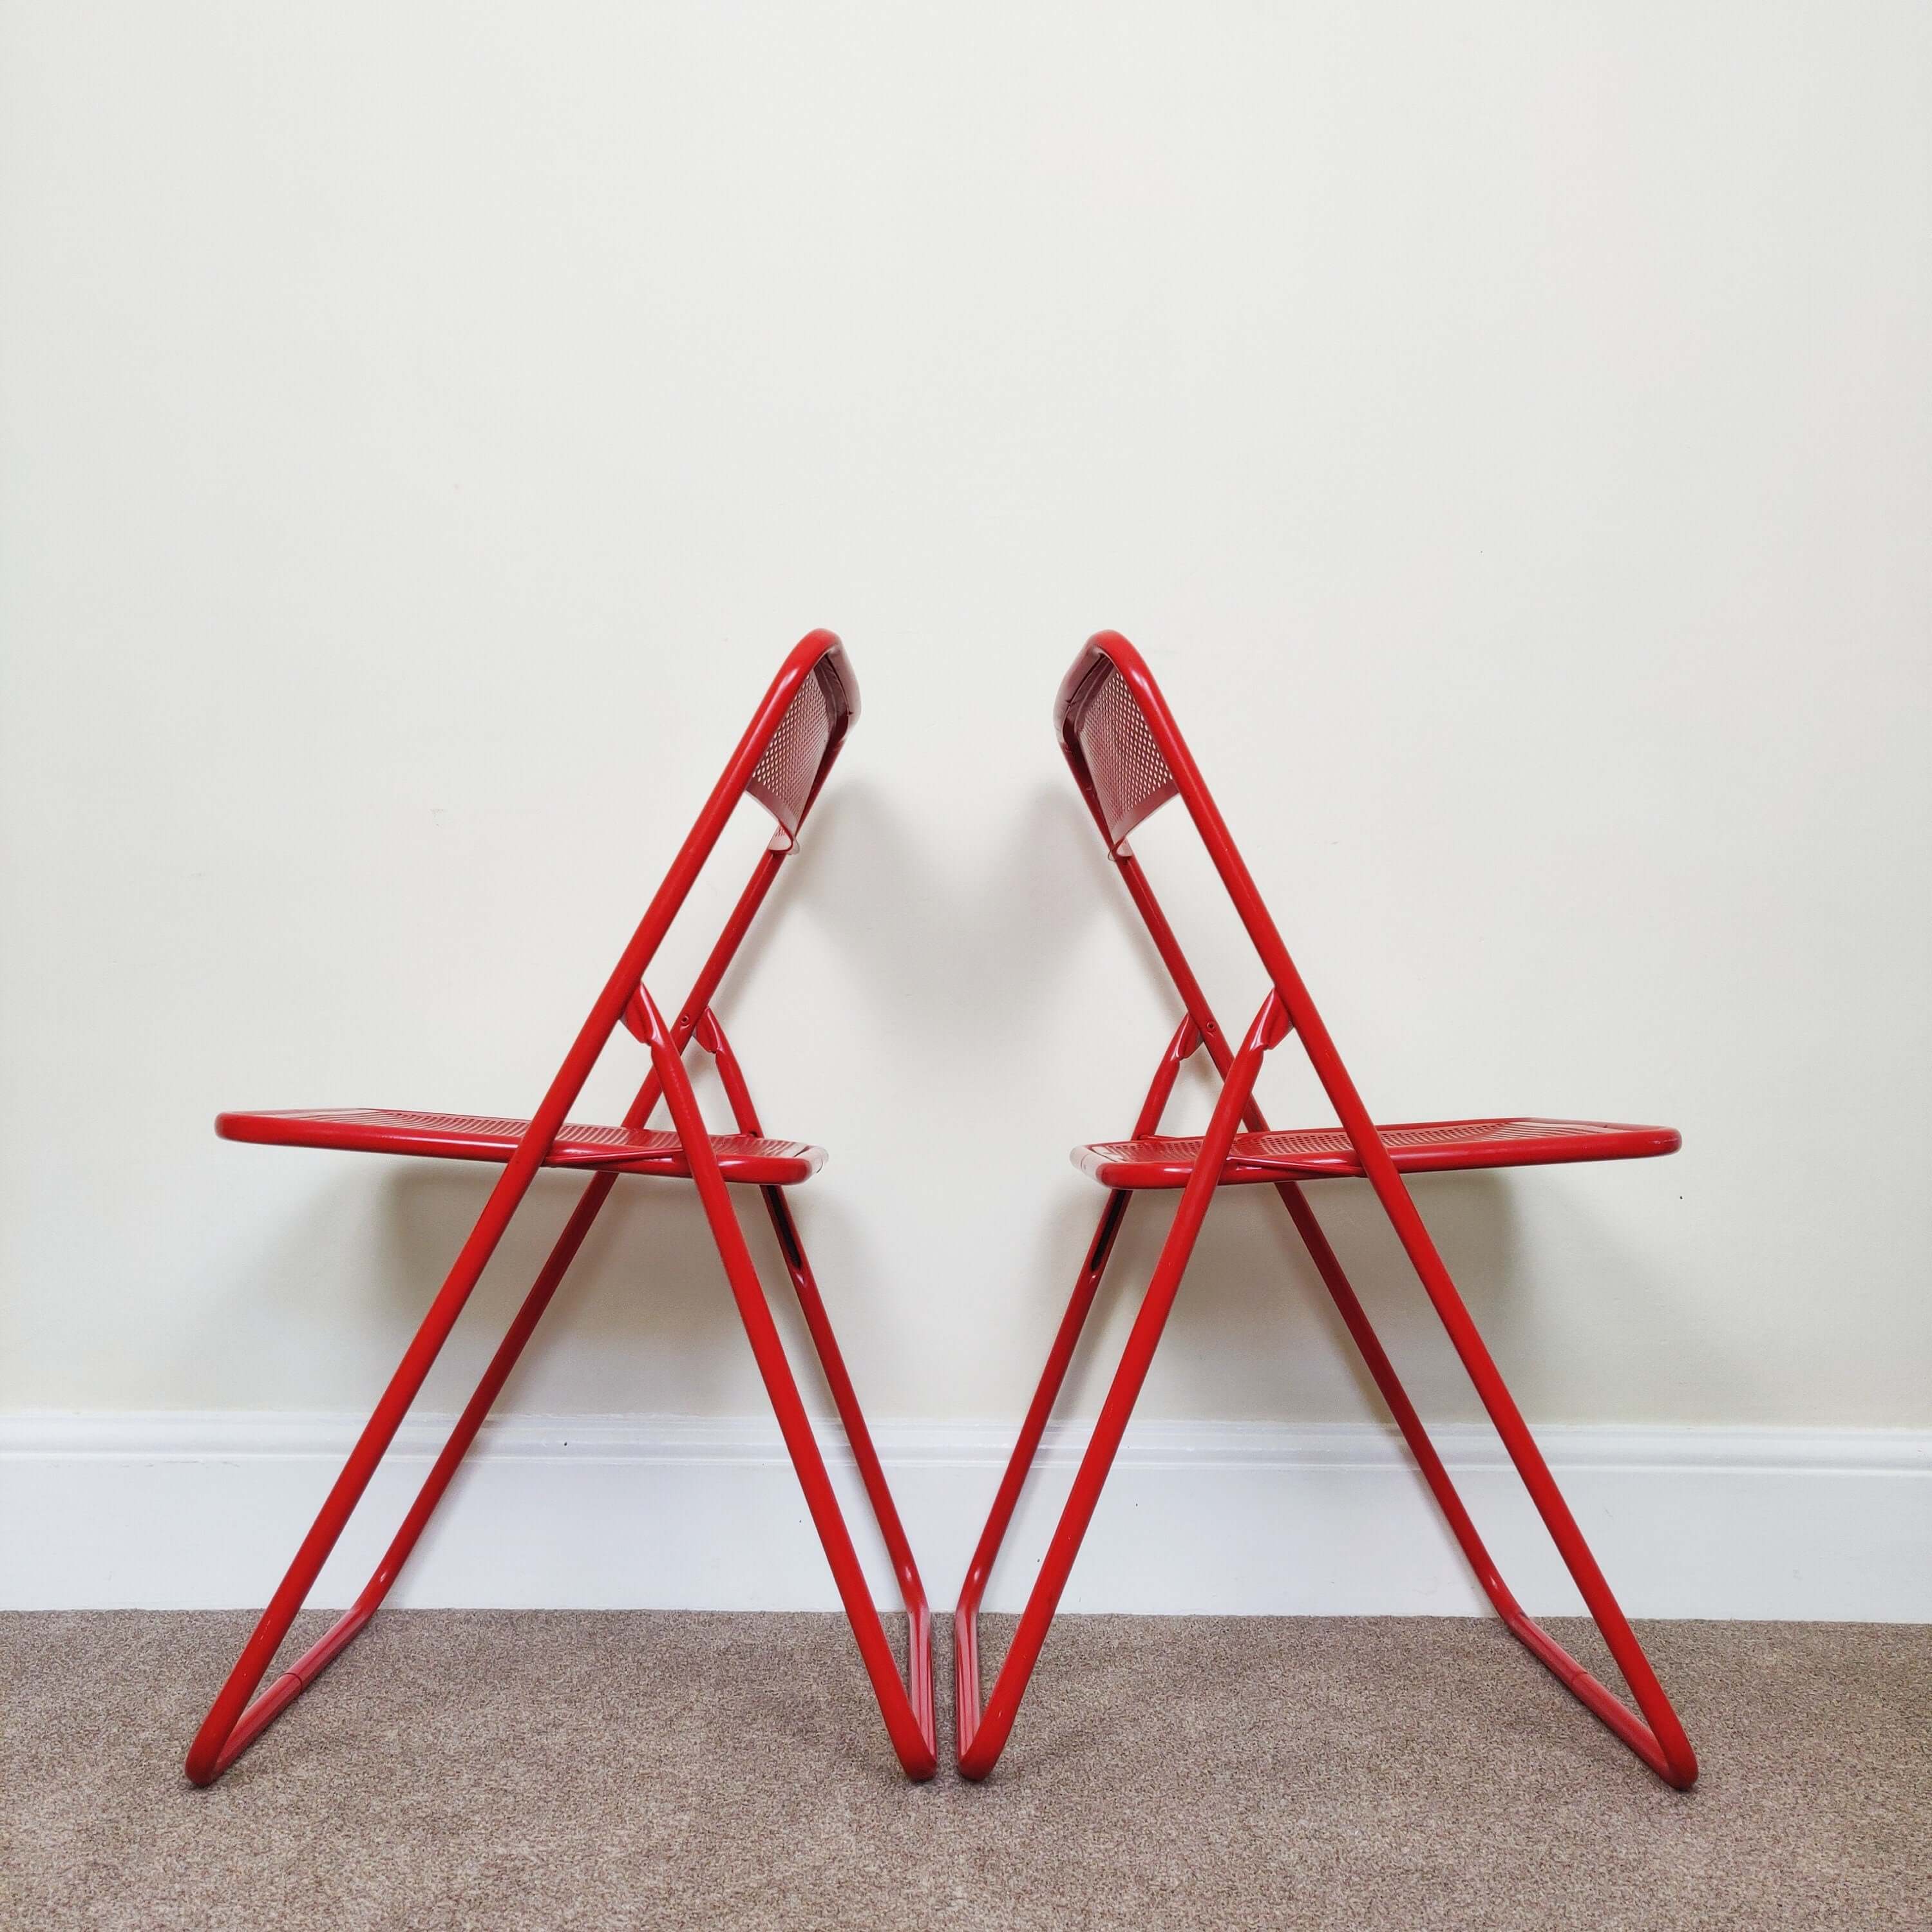 Vintage Folding Dining Chairs back to back